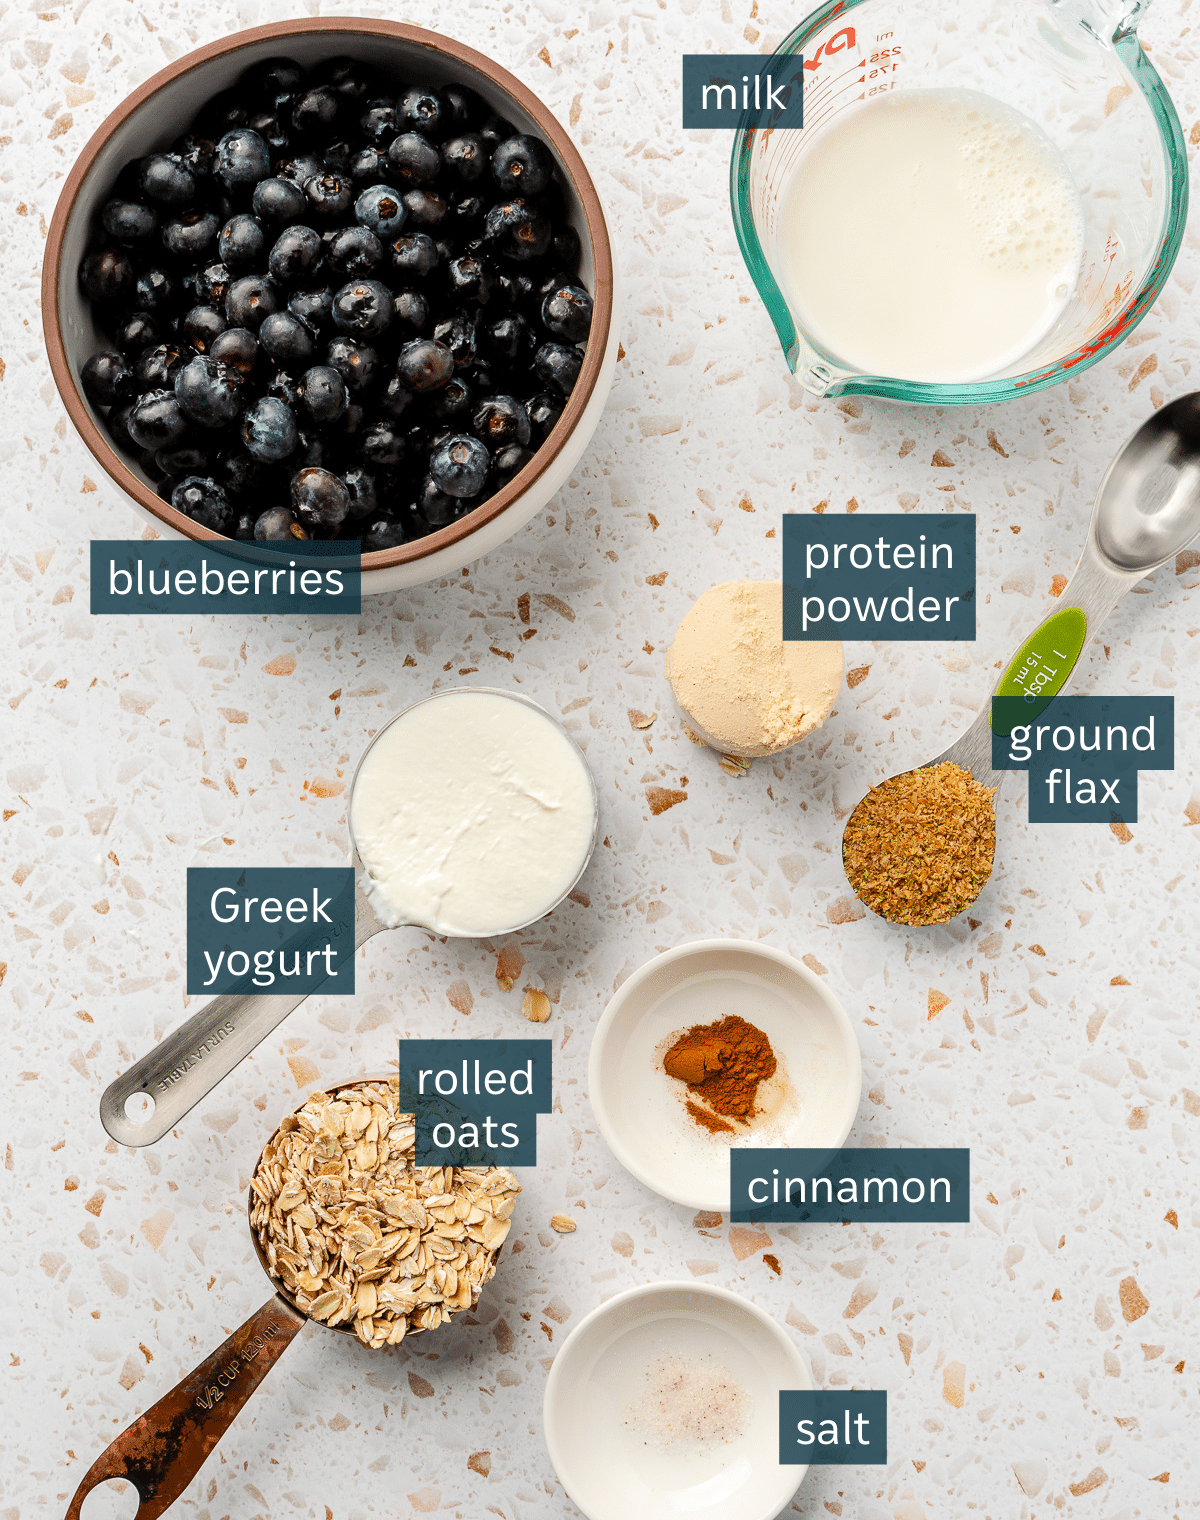 Ingredients for high protein overnight oats sit in a variety of bowls on a white speckled countertop.